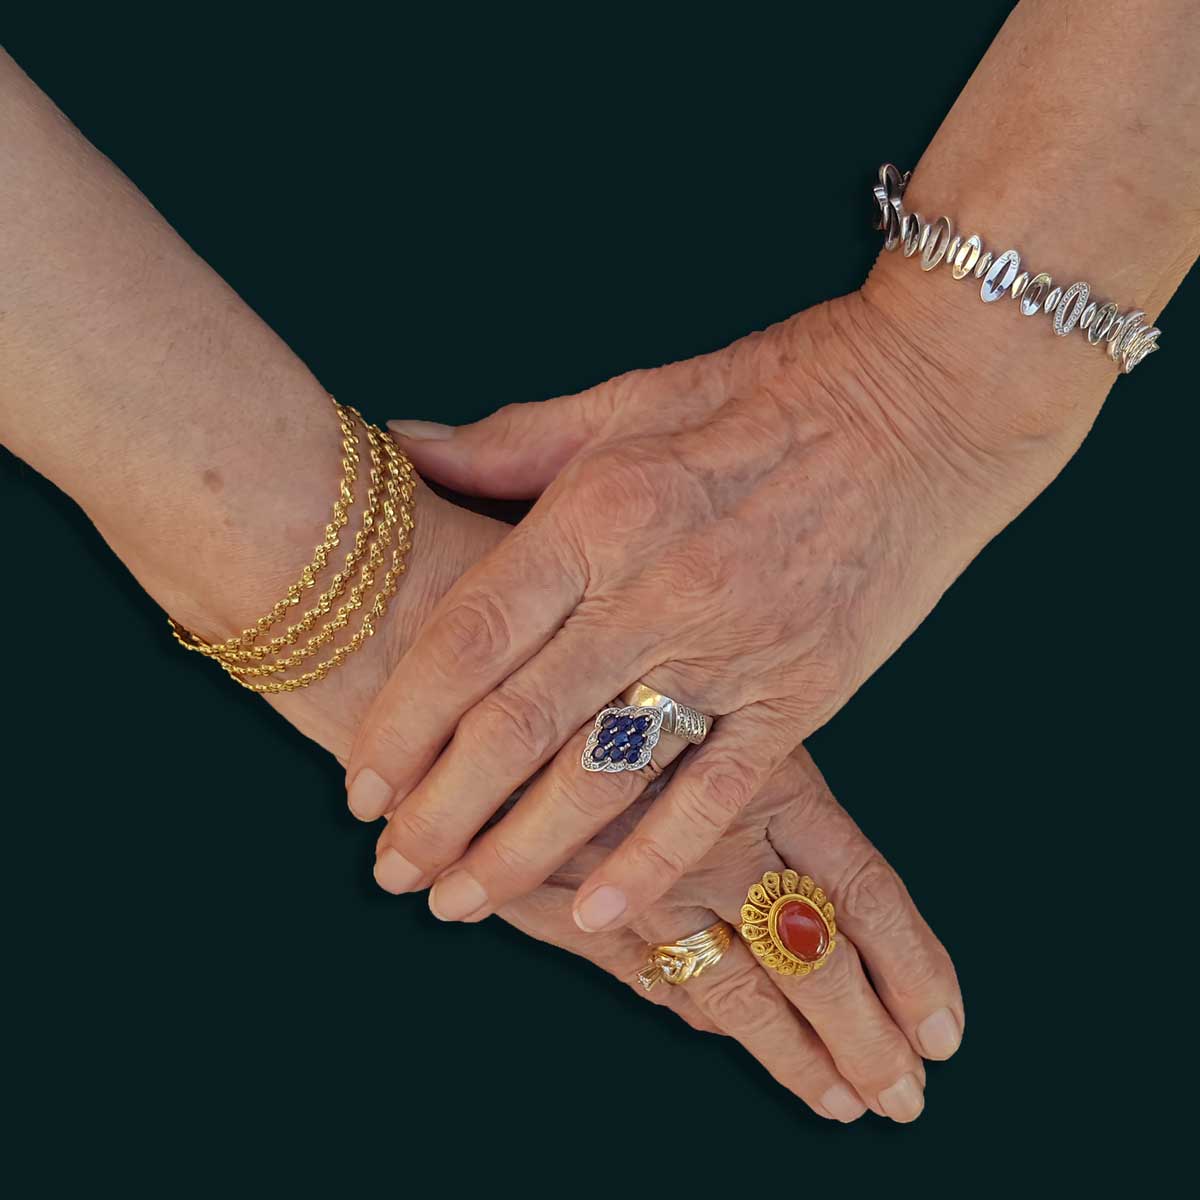 Elderly woman's hands clasped, with deep wrinkles and adorned with gold and gemstone jewelry